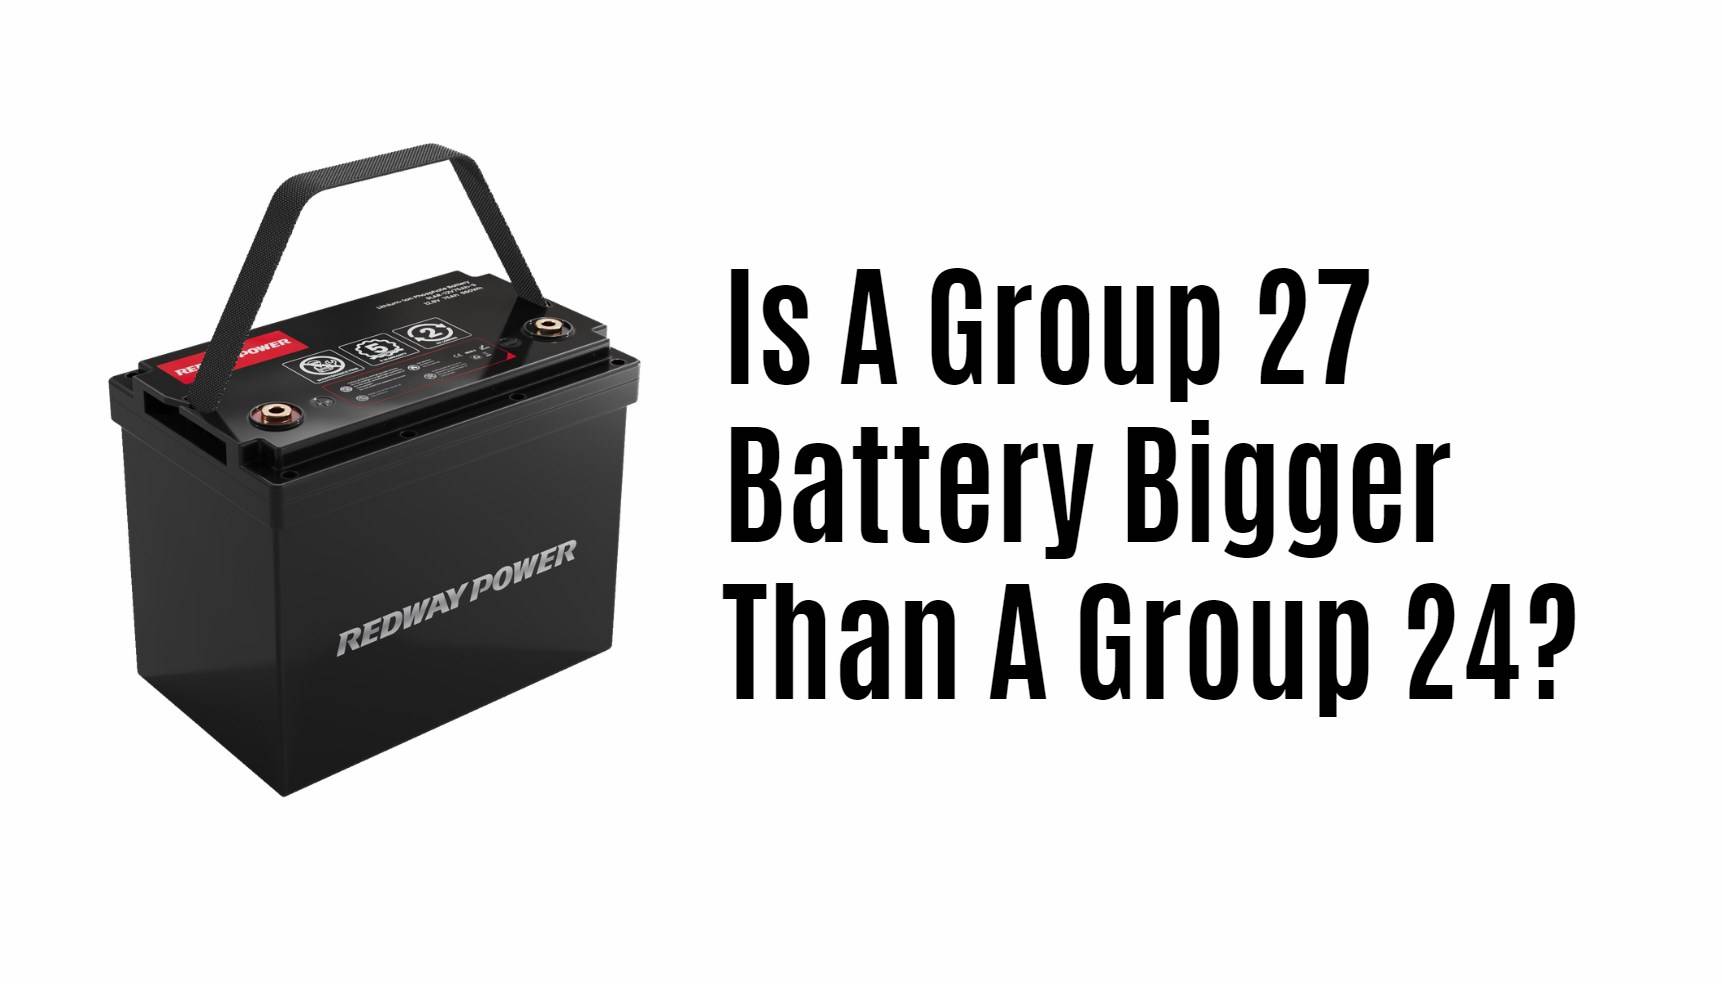 Is A Group 27 Battery Bigger Than A Group 24?